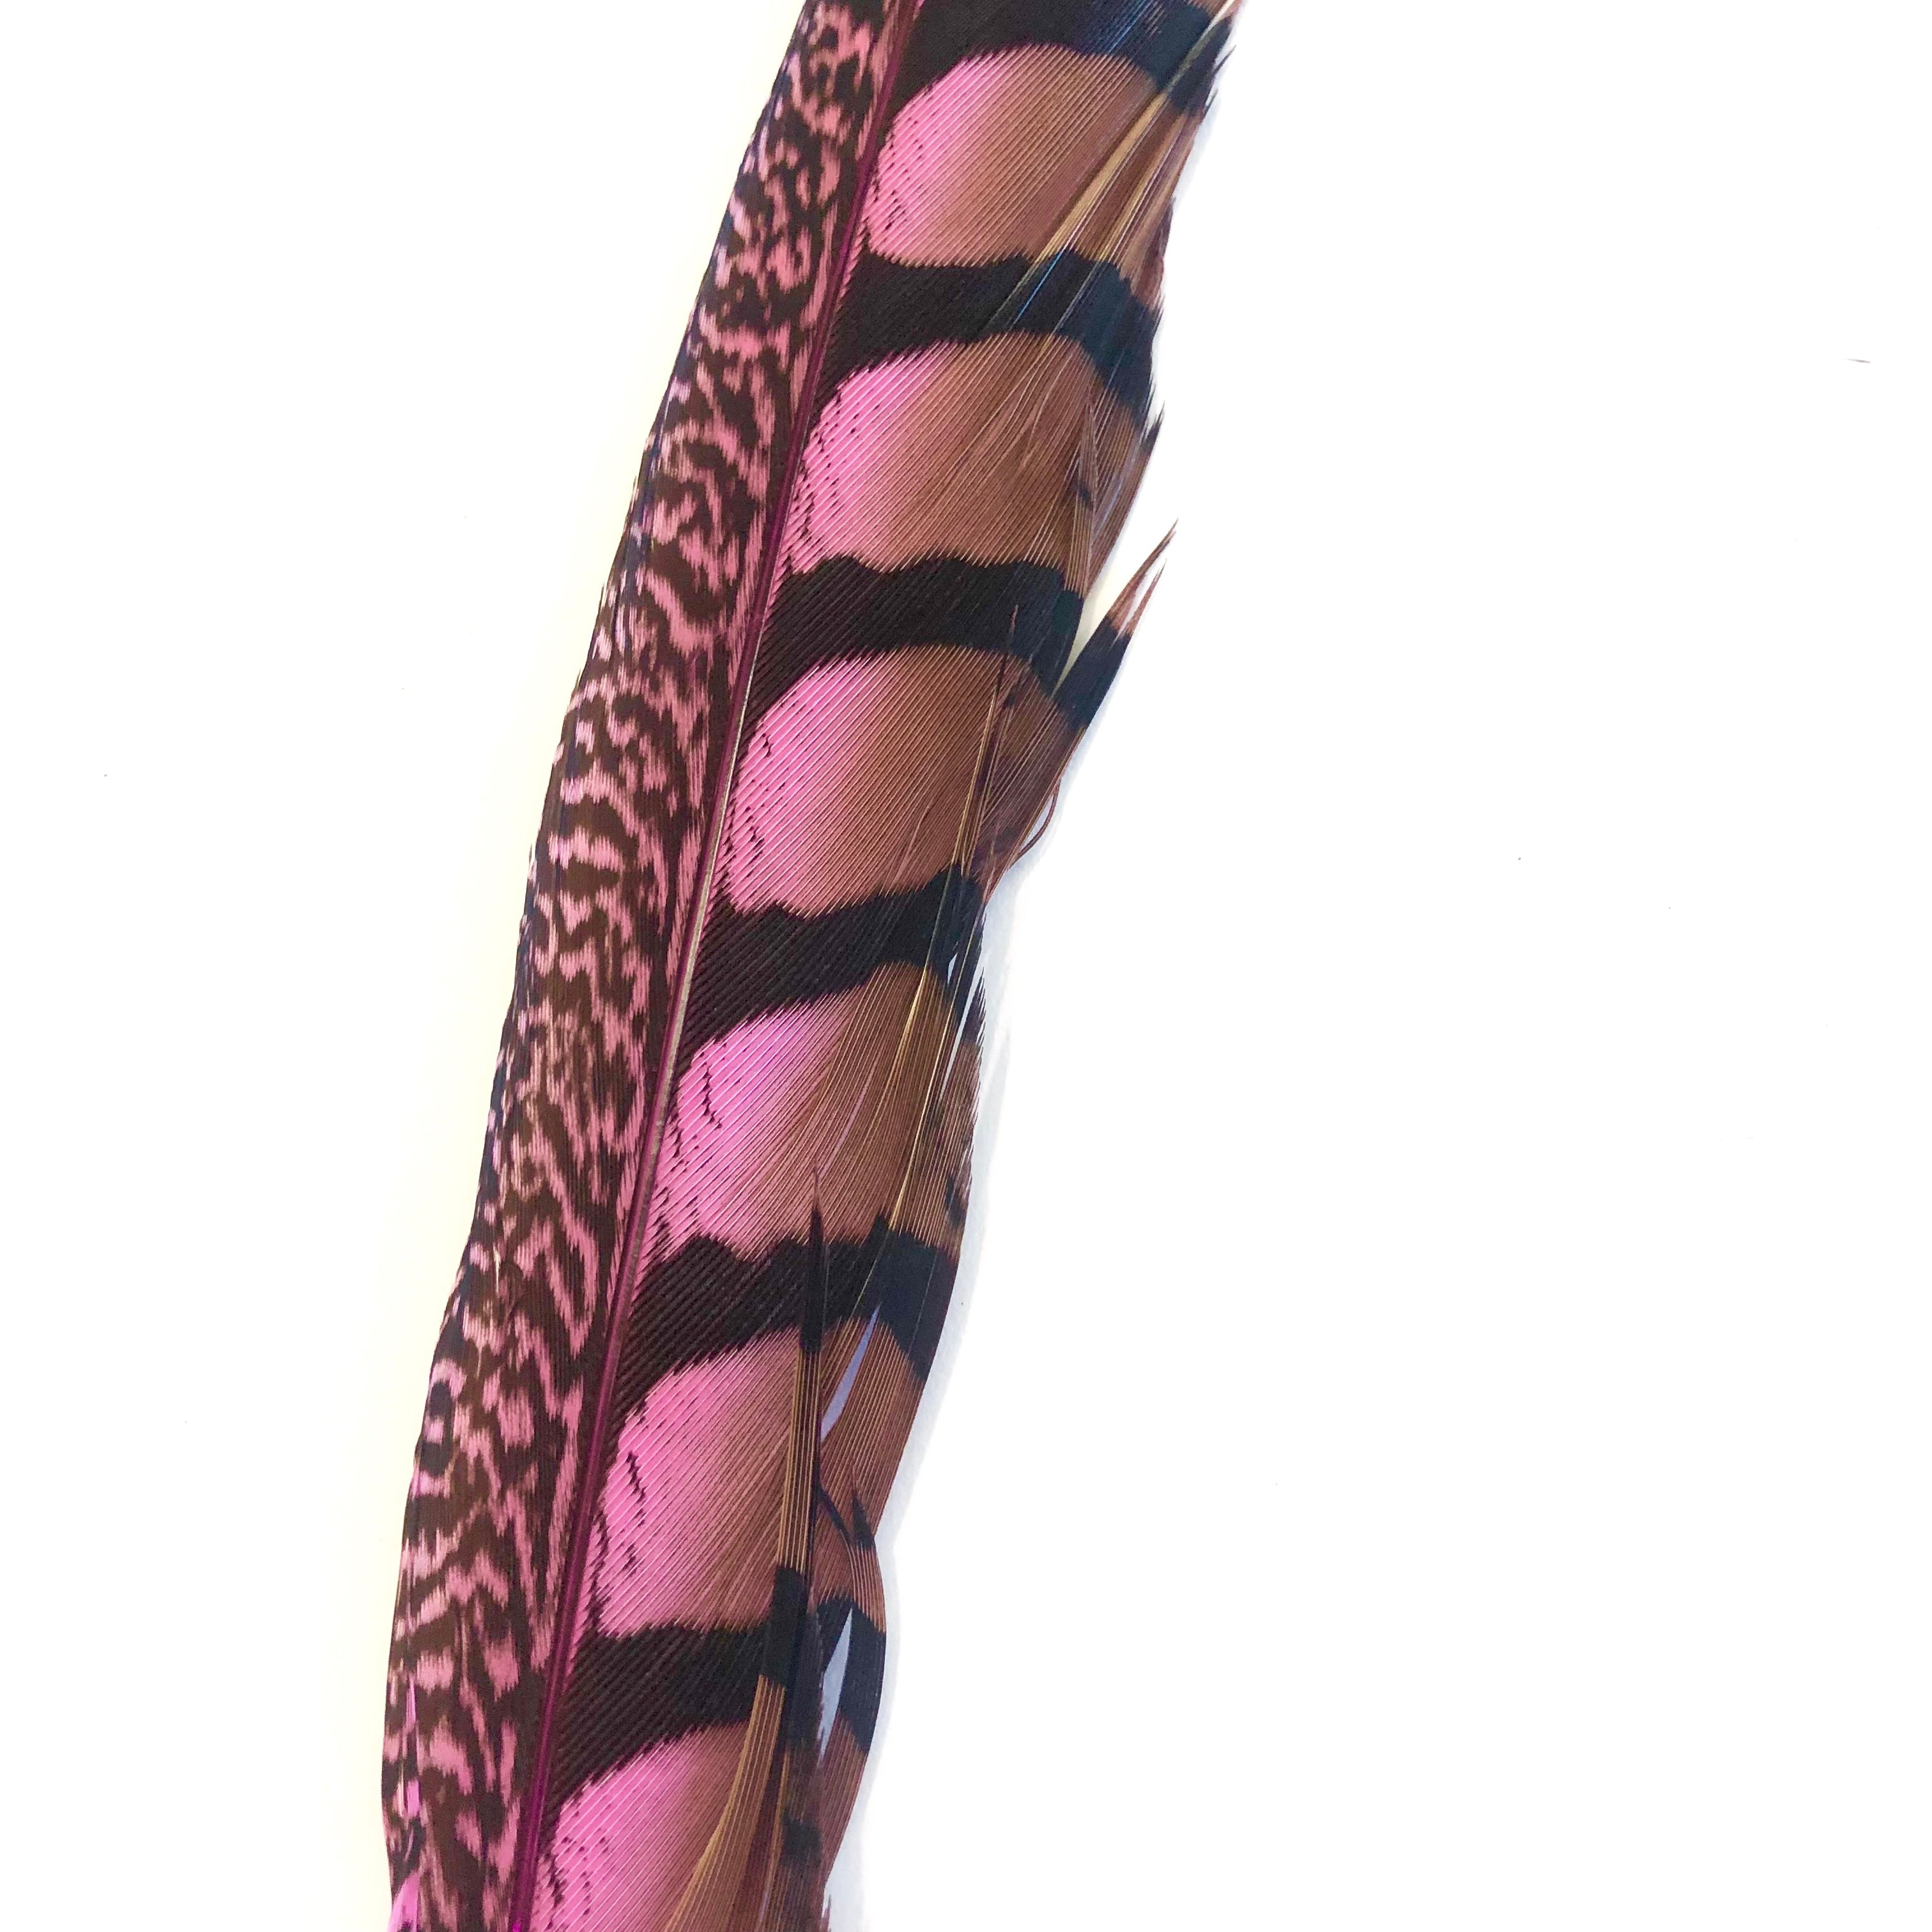 30" to 38" Lady Amherst Pheasant Side Tail Feather - Hot Pink ((SECONDS))